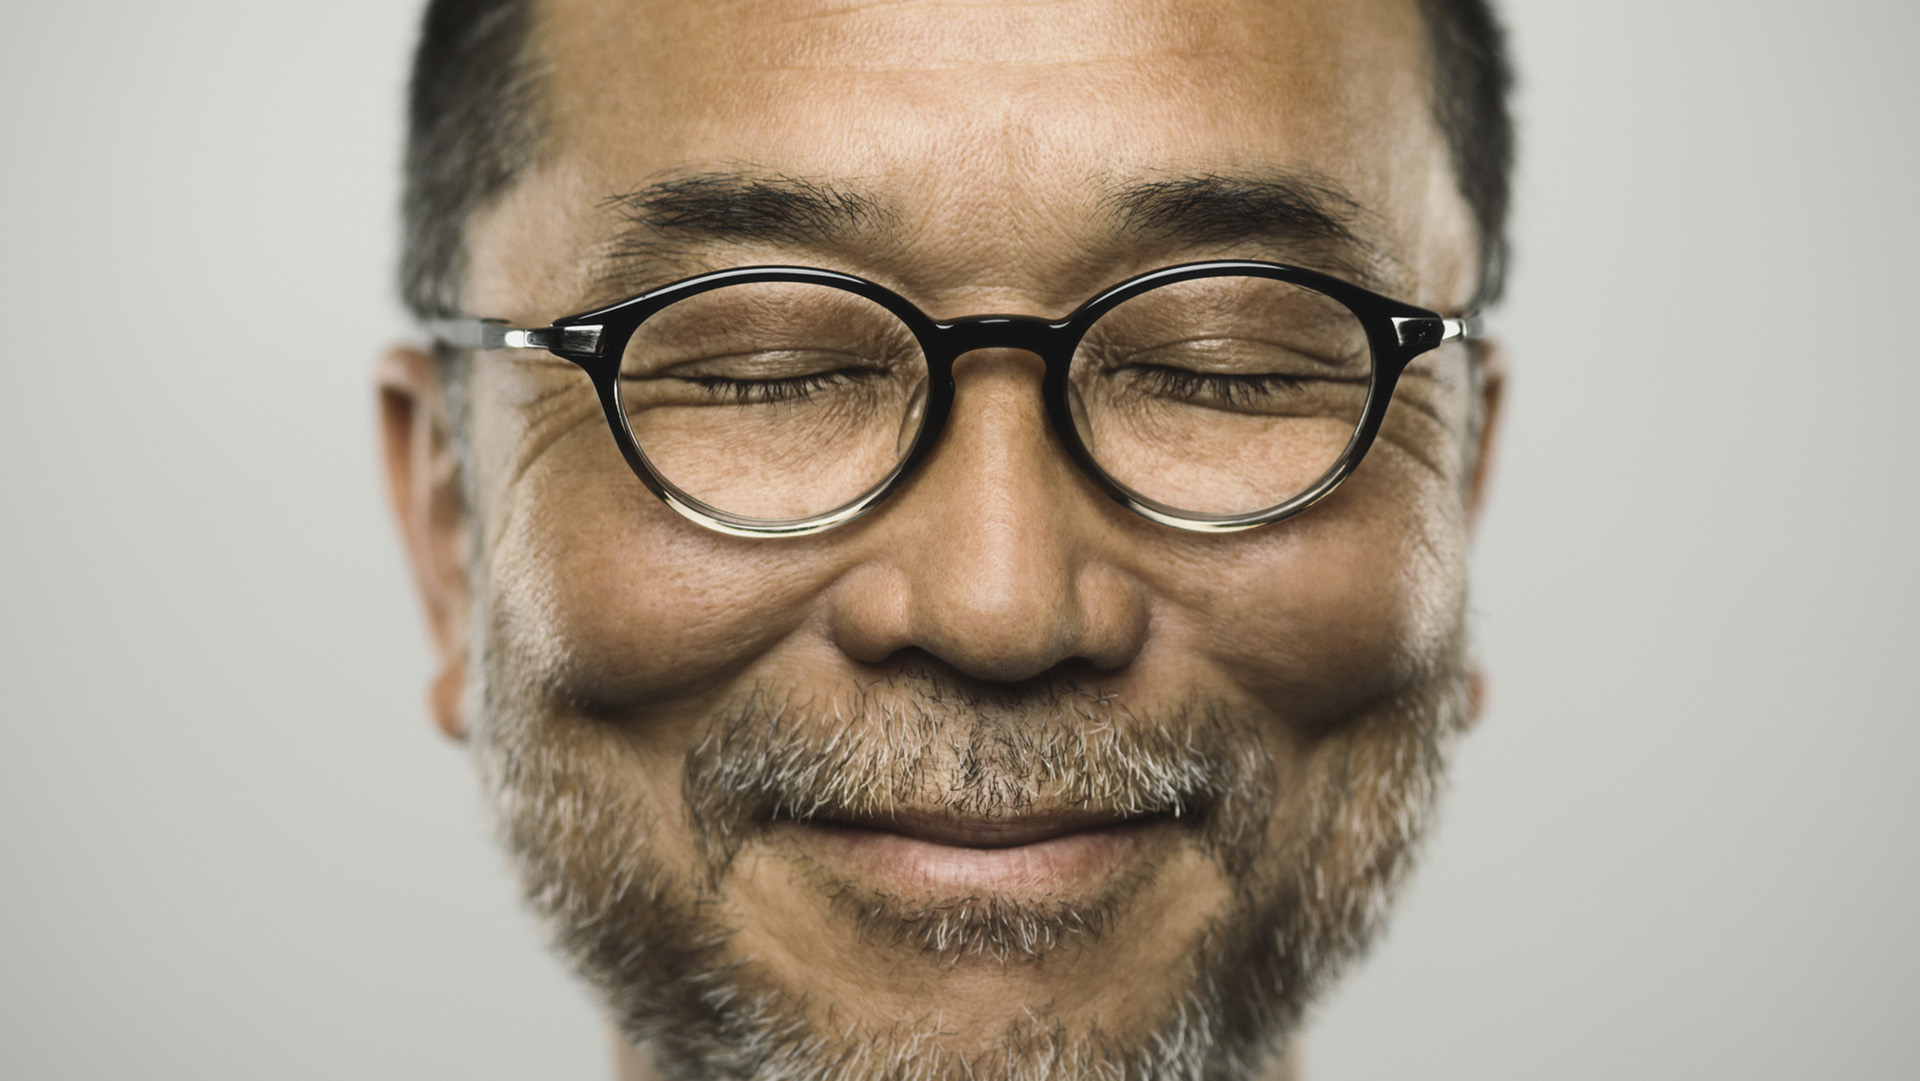 Studio portrait of a japanese mature man looking at camera with relaxed expression. The man has around 50 years and has glasses, short hair and a short grey beard. Vertical colour image from a medium format digital camera.